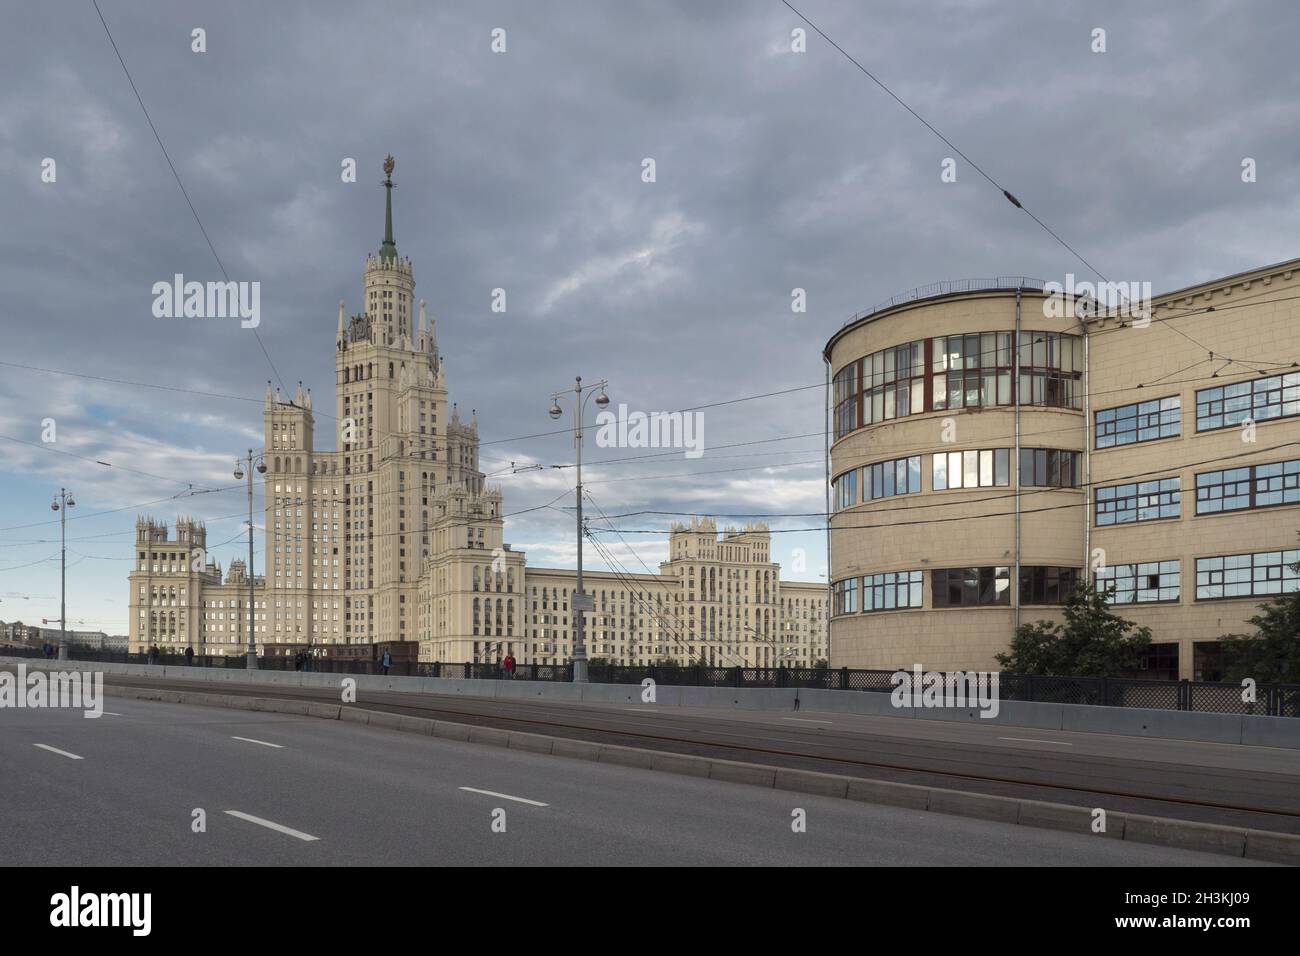 Russia, Moscow, City View, Soviet-Era Architecture, Buildings of Different Styles. Stock Photo